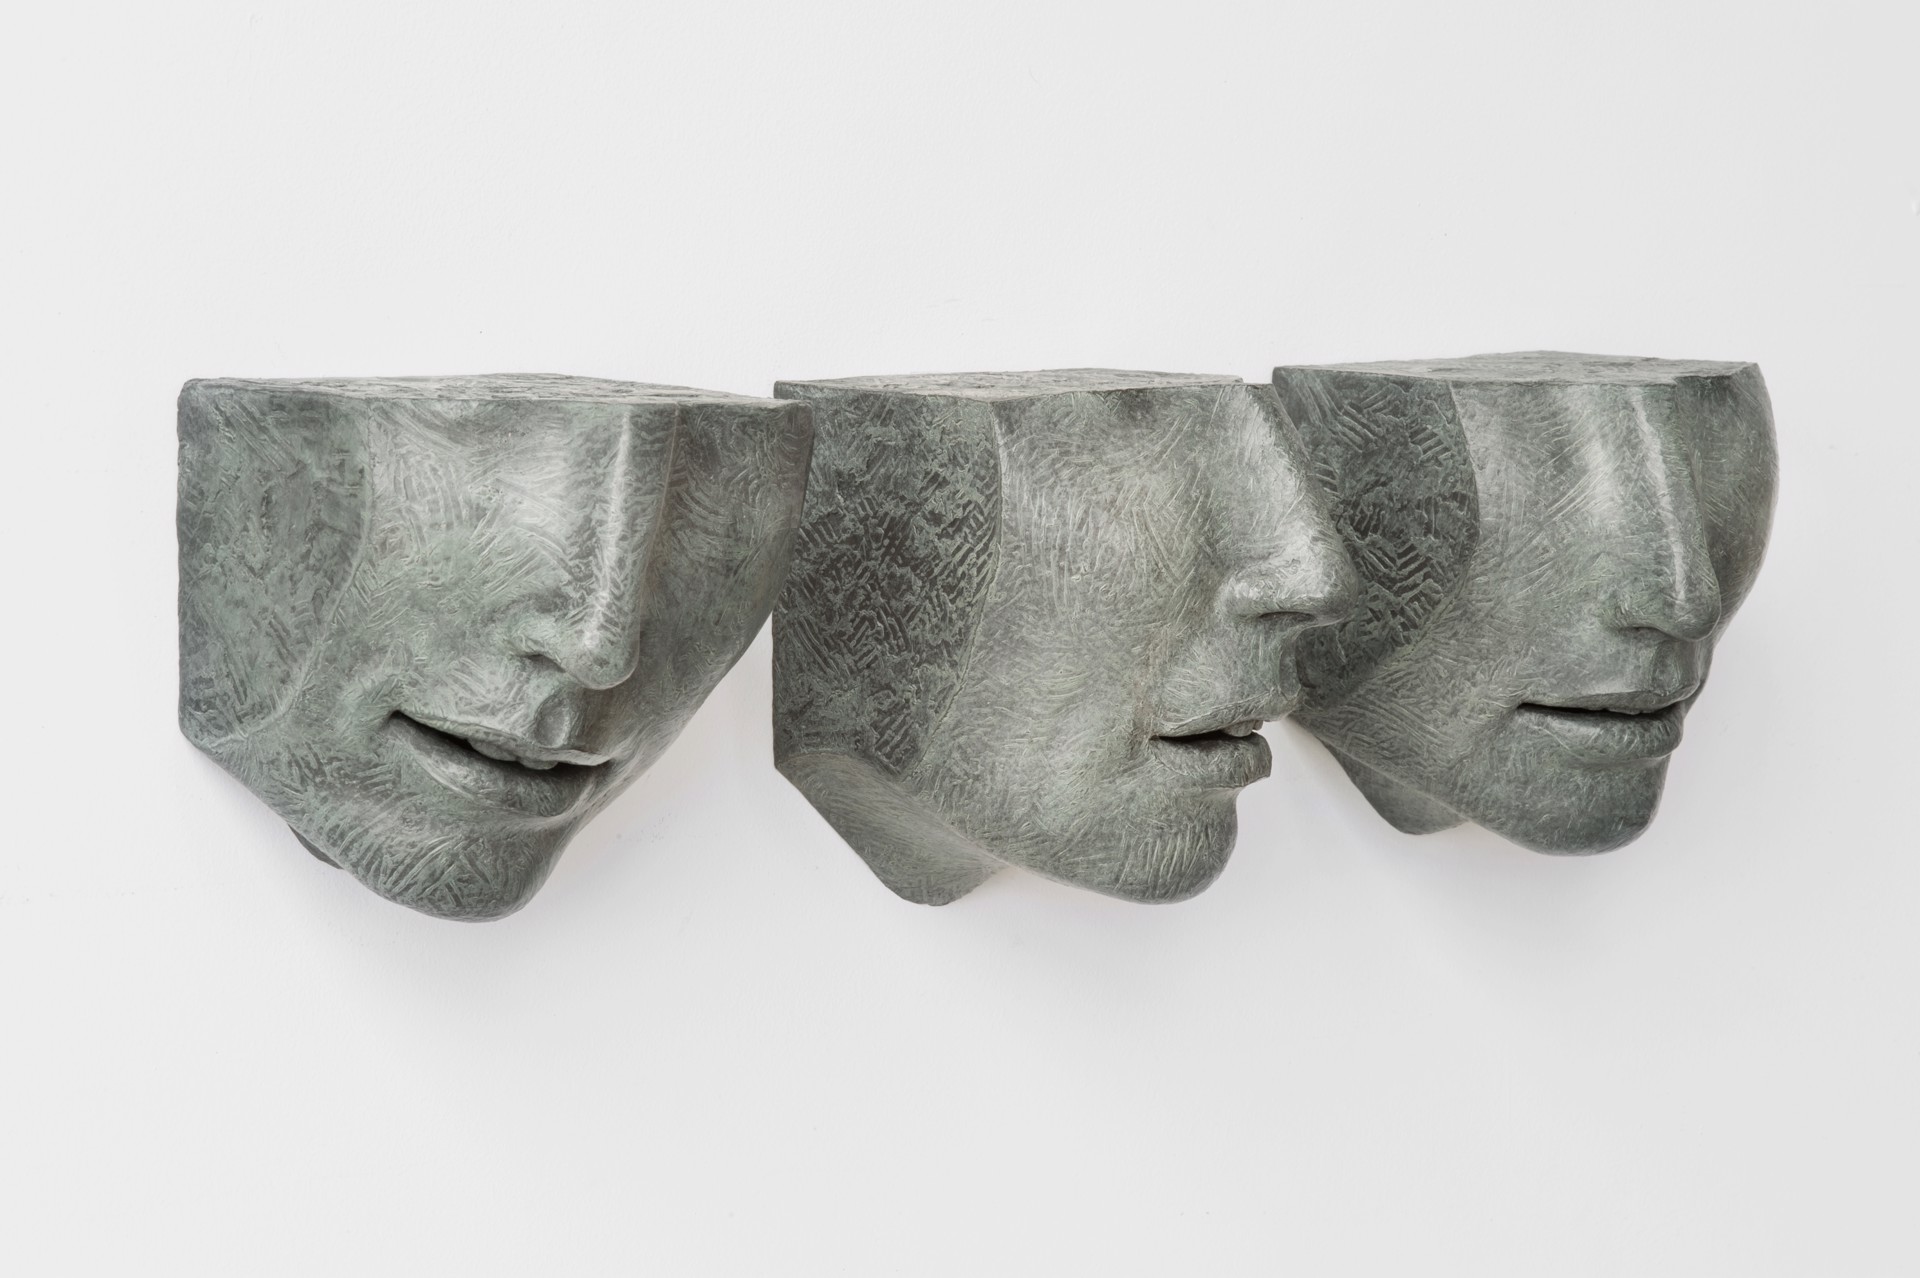 Small Face Fragments VII, VIII, IX by Susan Stamm Evans